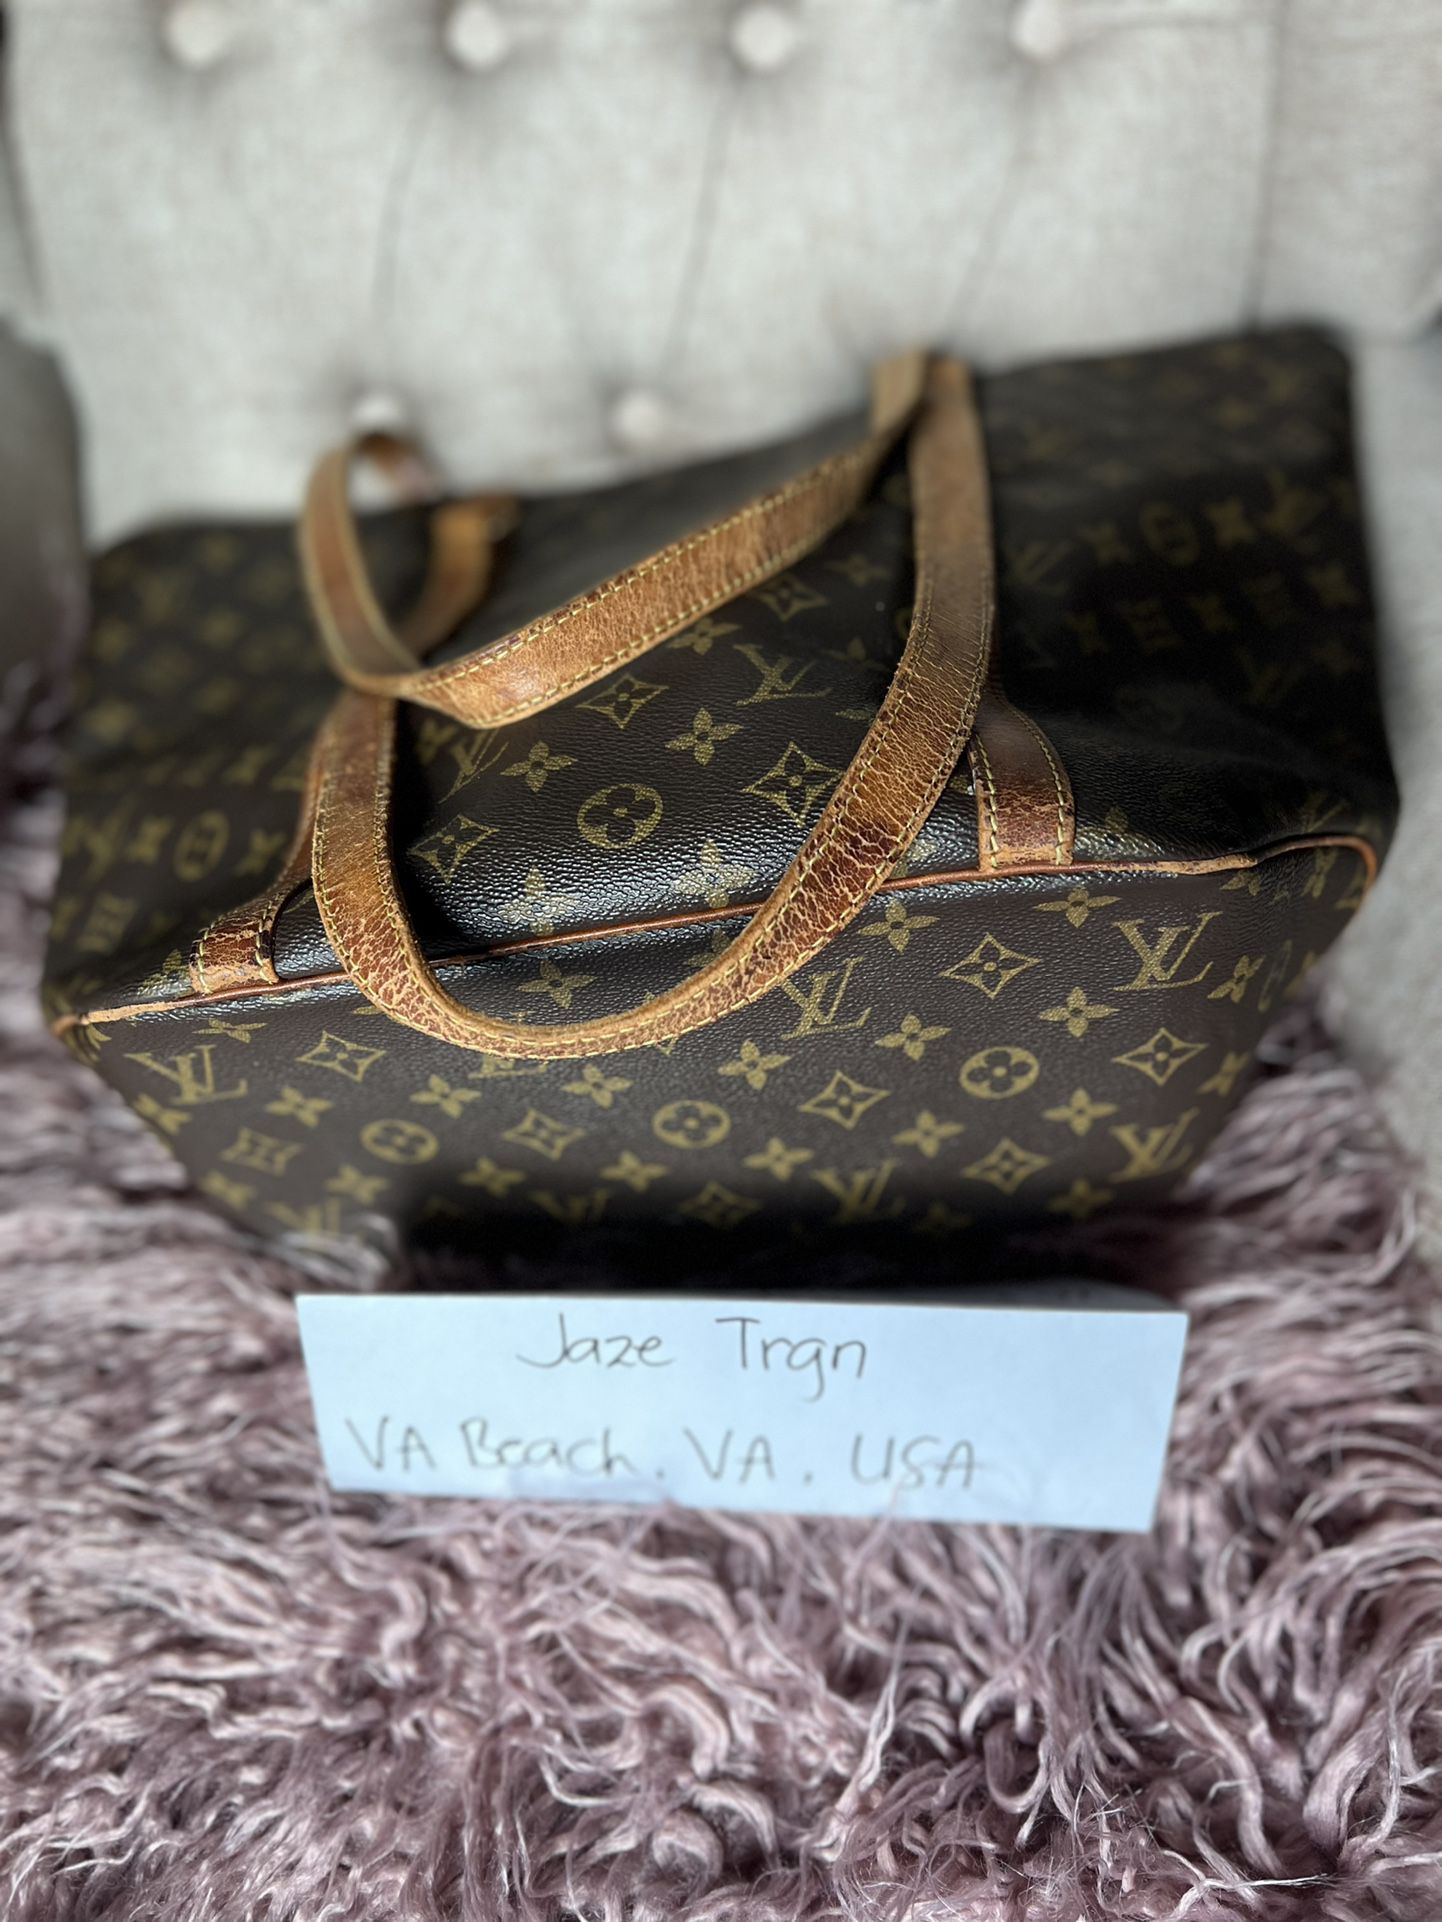 New Louis Vuitton Backpack!! for Sale in Chesapeake, VA - OfferUp